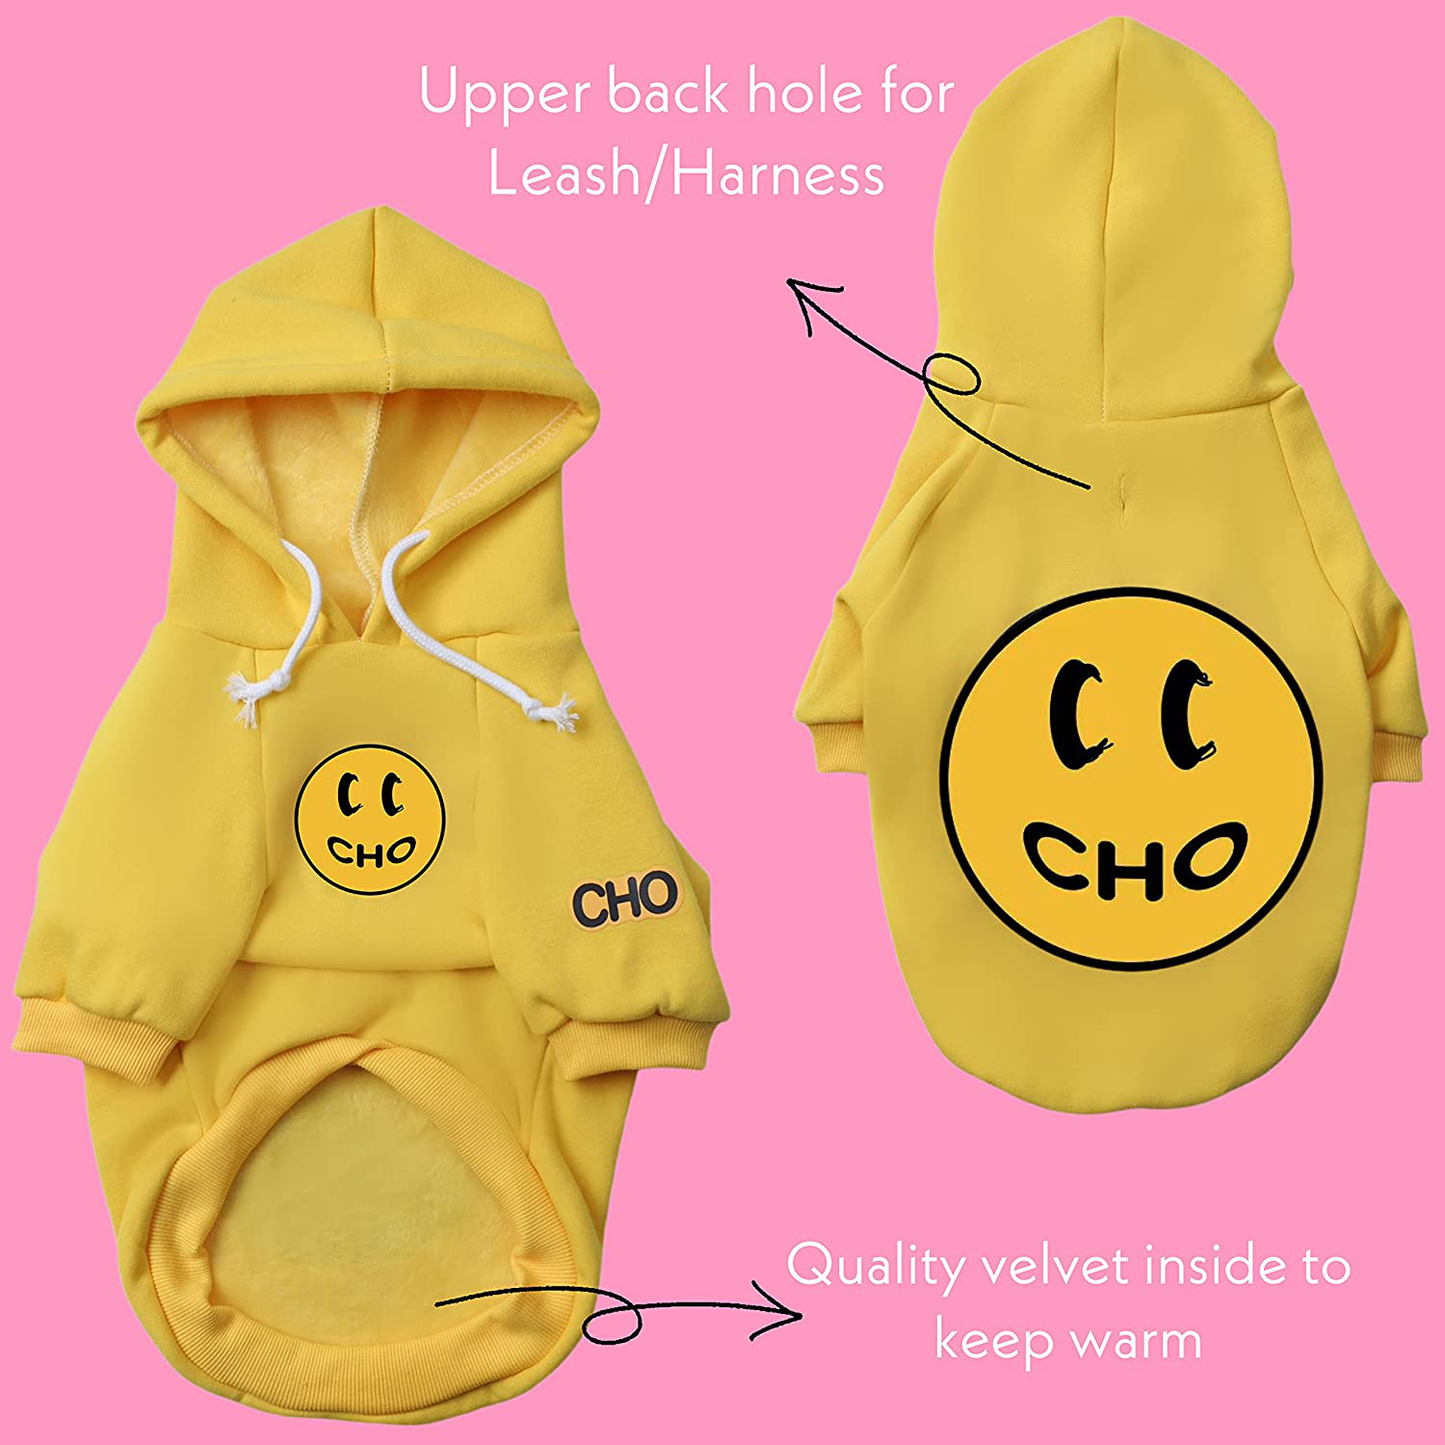 Chochocho Smile Dog Hoodie, Smiley Face Dog Sweater, Stylish Dog Clothes, Cotton Sweatshirt for Dogs and Puppies, Fashion Outfit for Dogs Cats Puppy Small Medium Large Animals & Pet Supplies > Pet Supplies > Dog Supplies > Dog Apparel ChoChoCho   